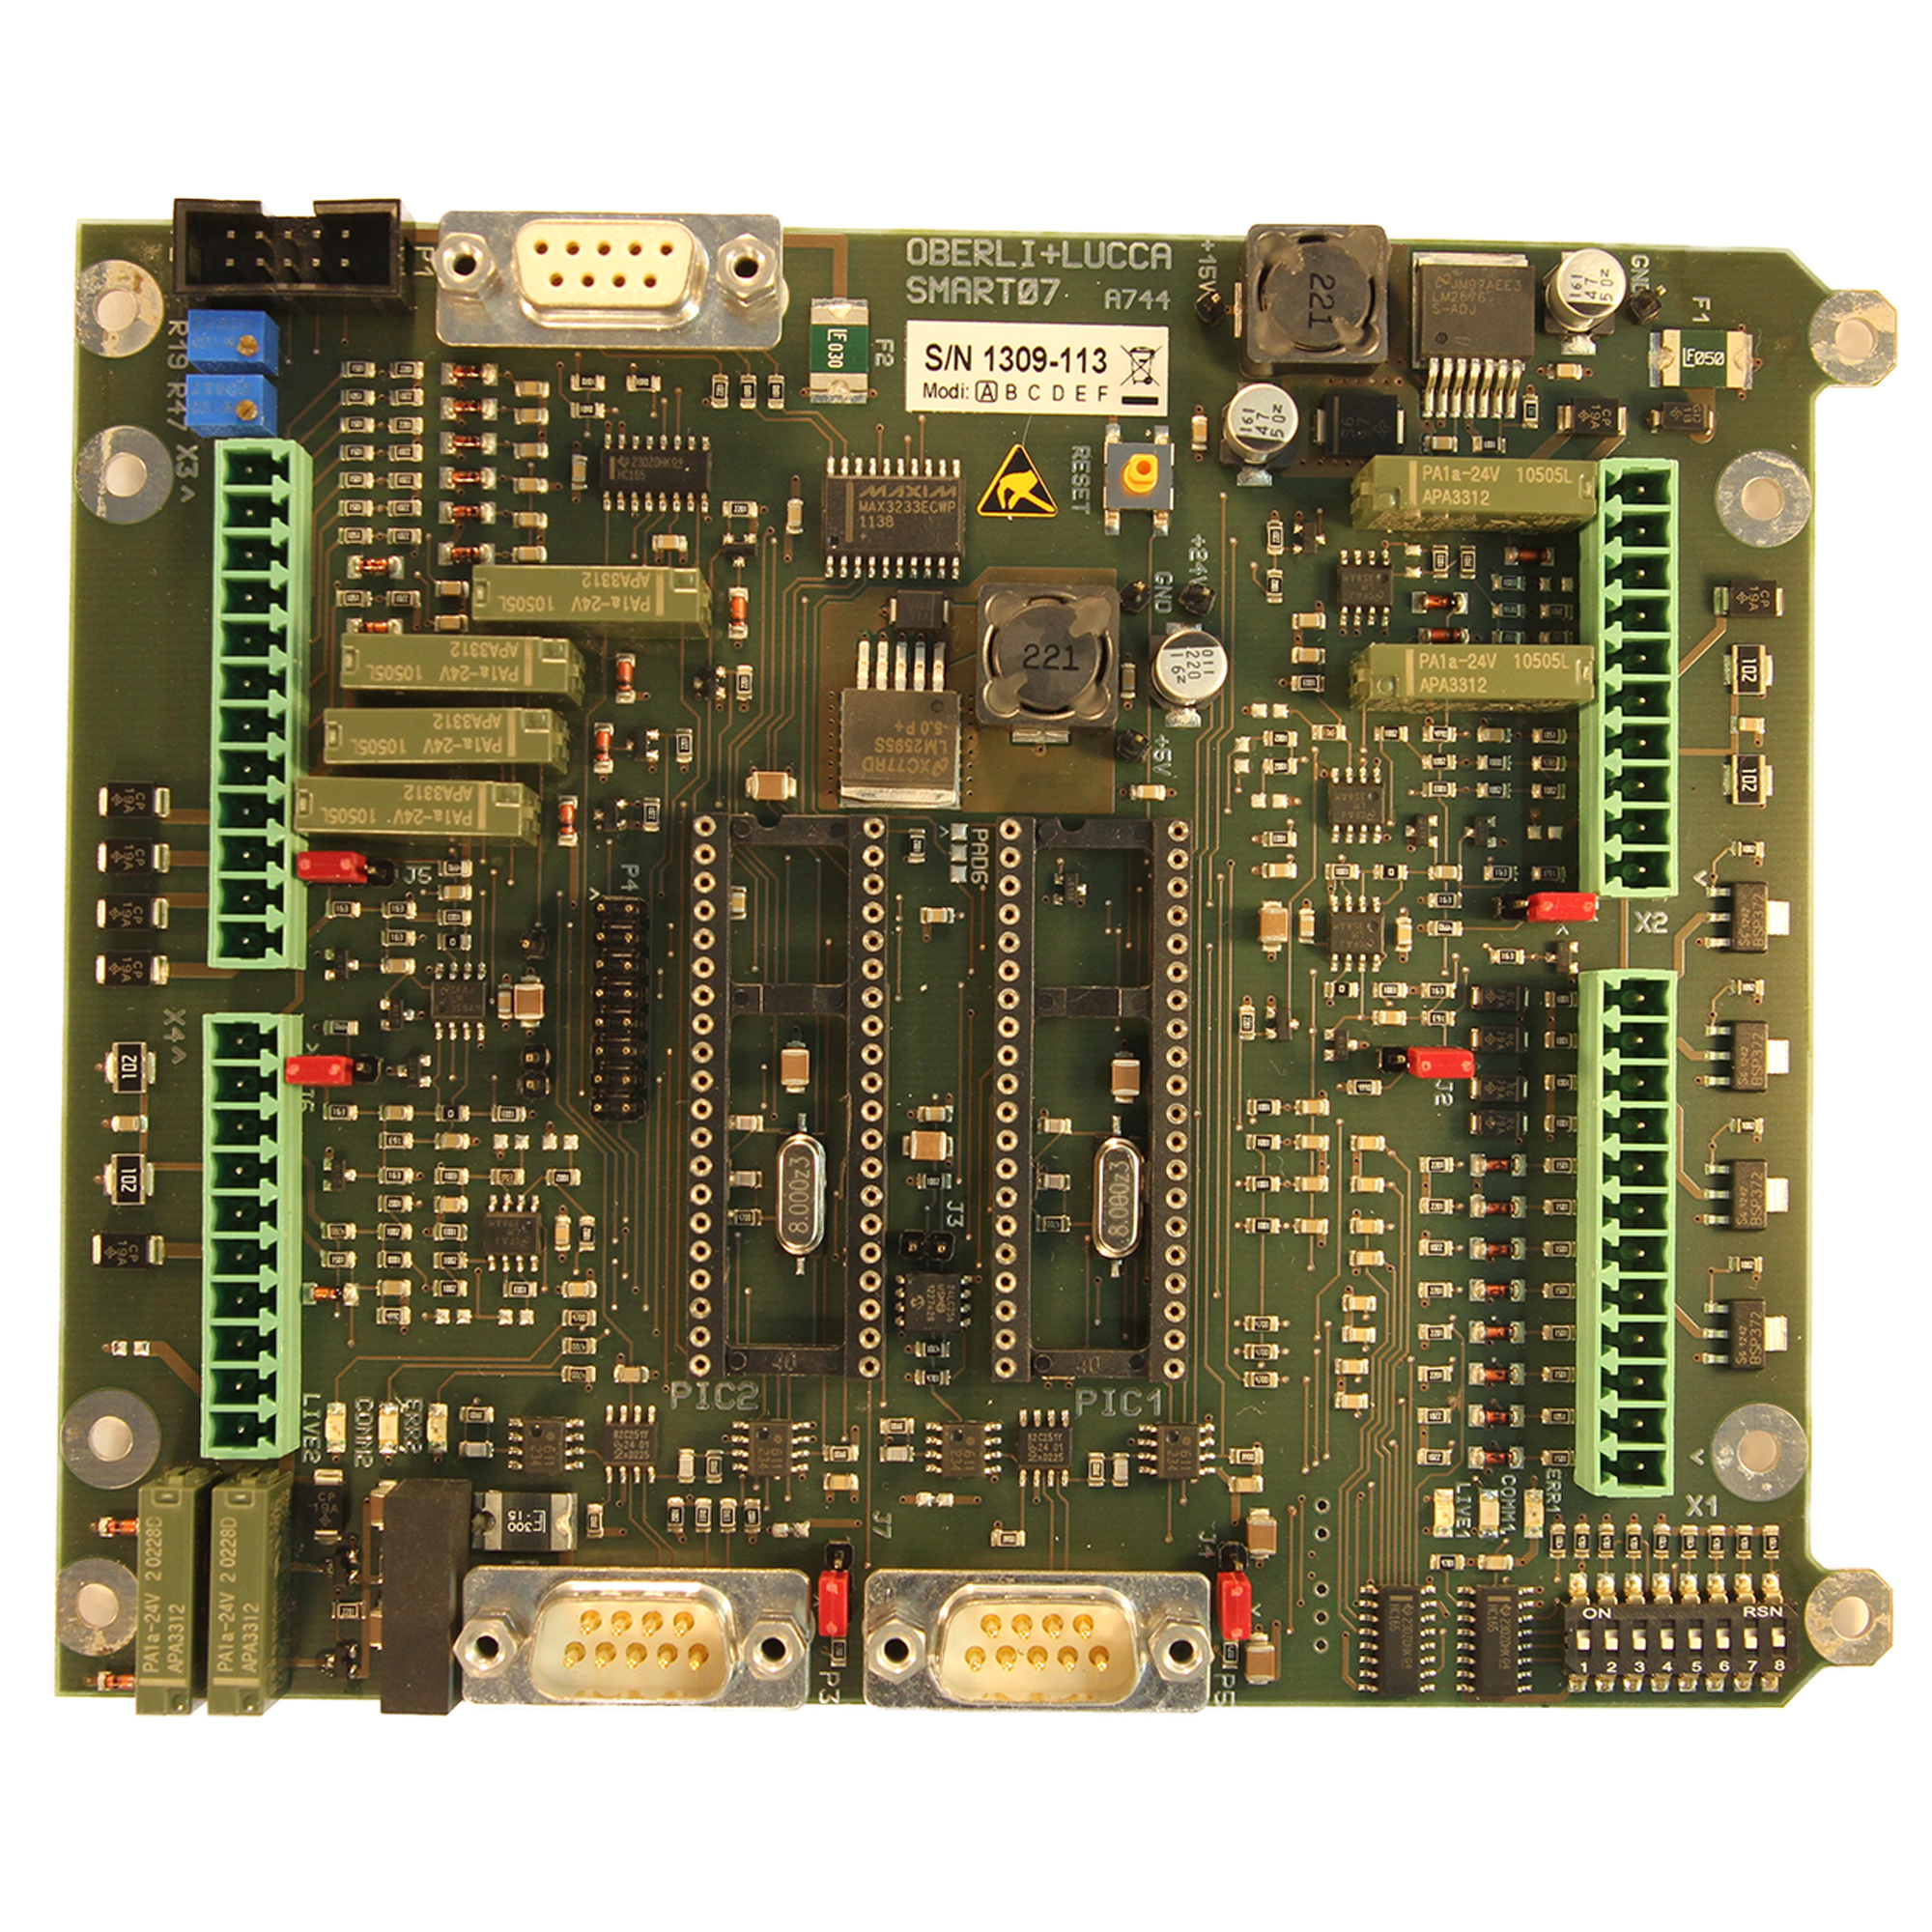 Dual MIcrocontroller PLC with CAN and matrix touch